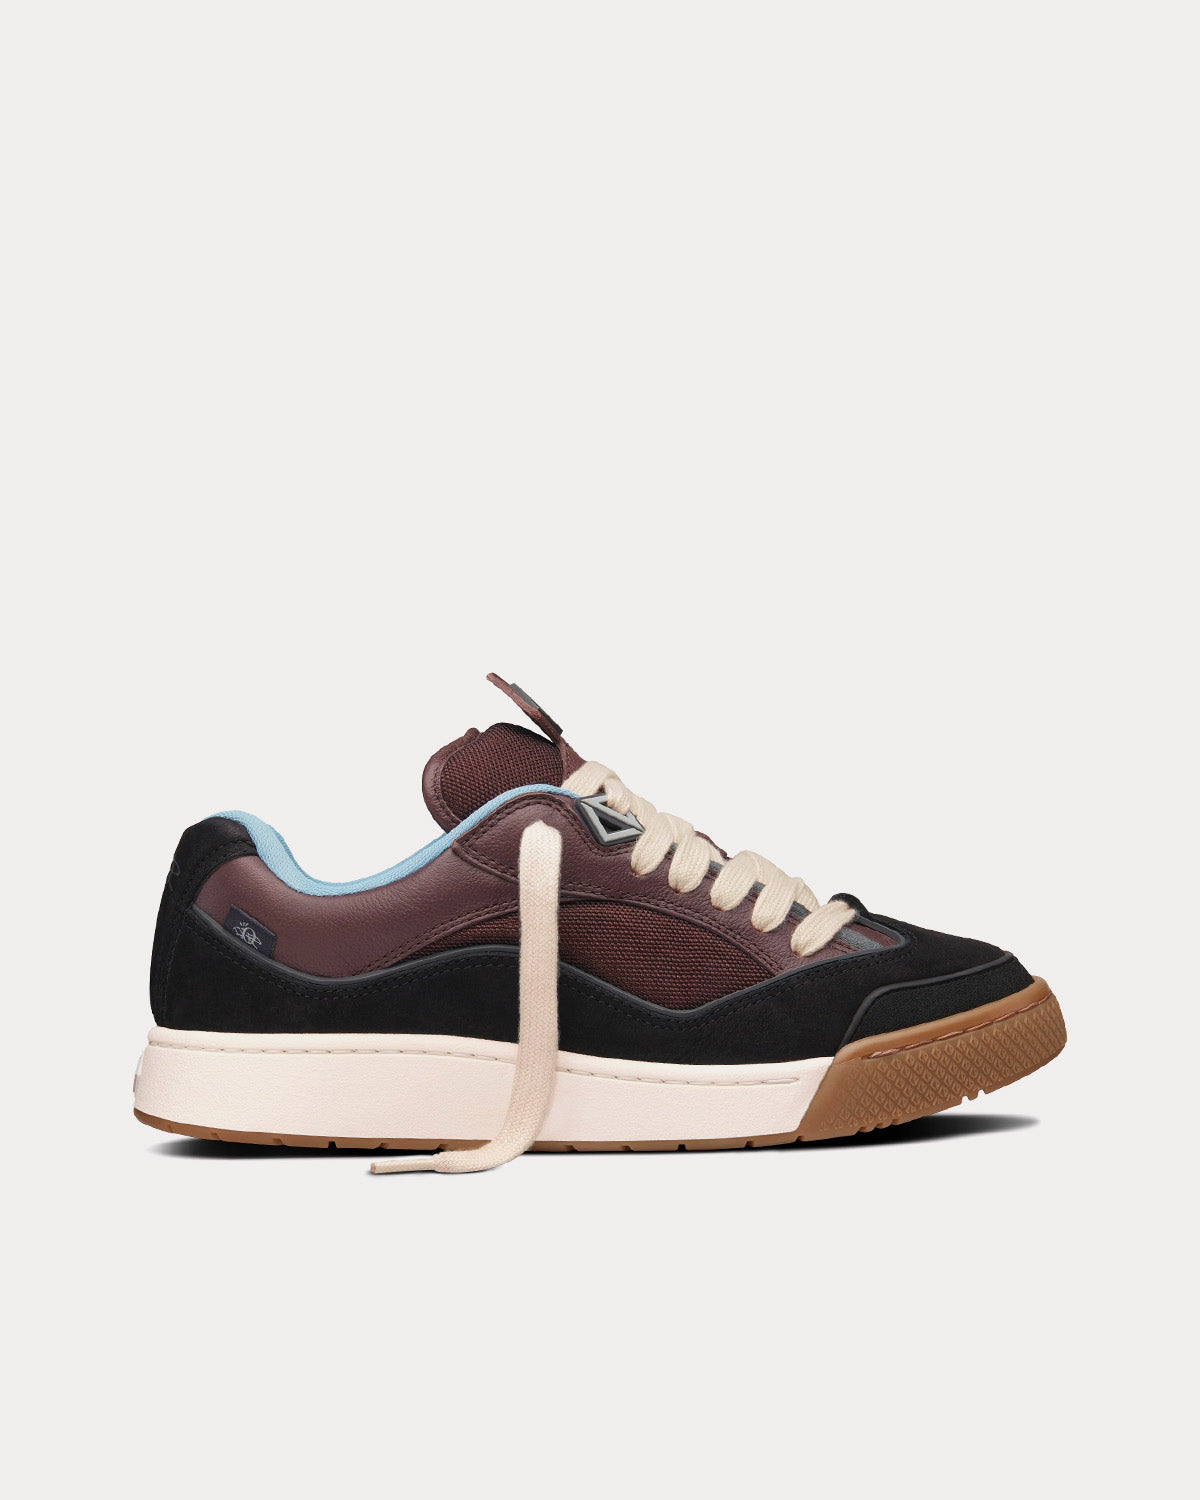 B713 'Cactus Jack' Mocha Grained Calfskin and Technical Mesh with Black  Nubuck Calfskin Low Top Sneakers